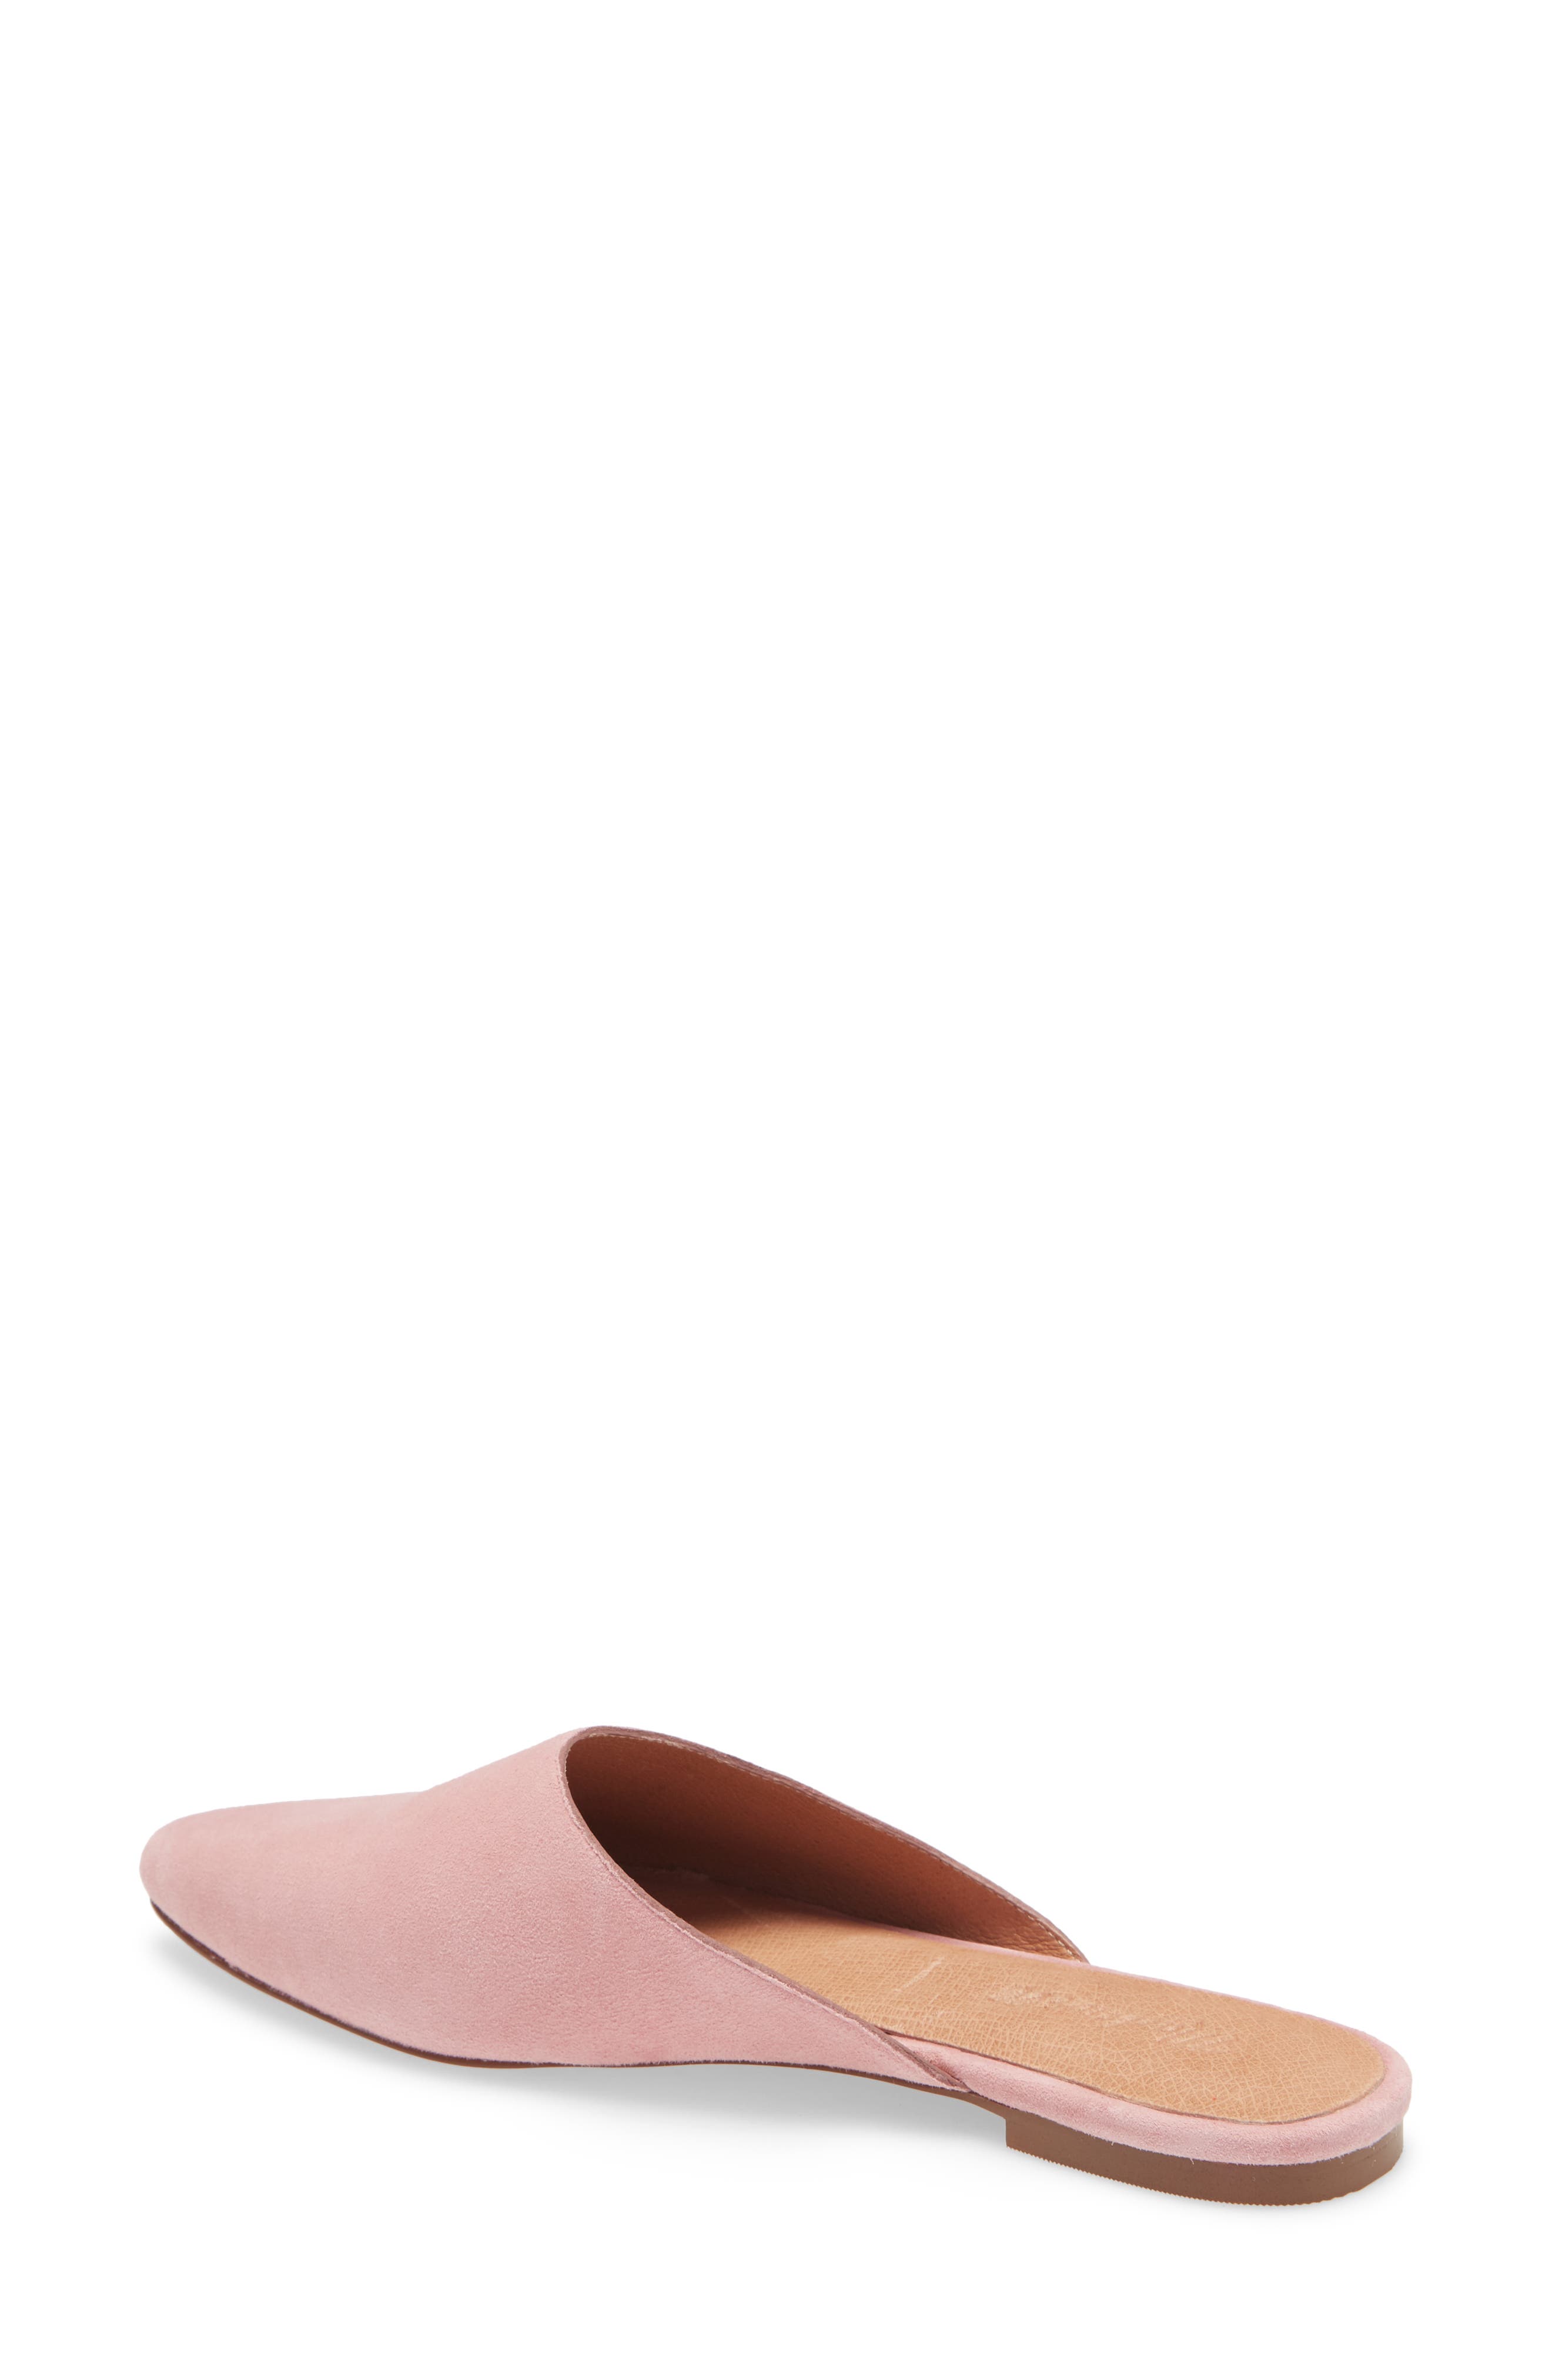 madewell suede mules